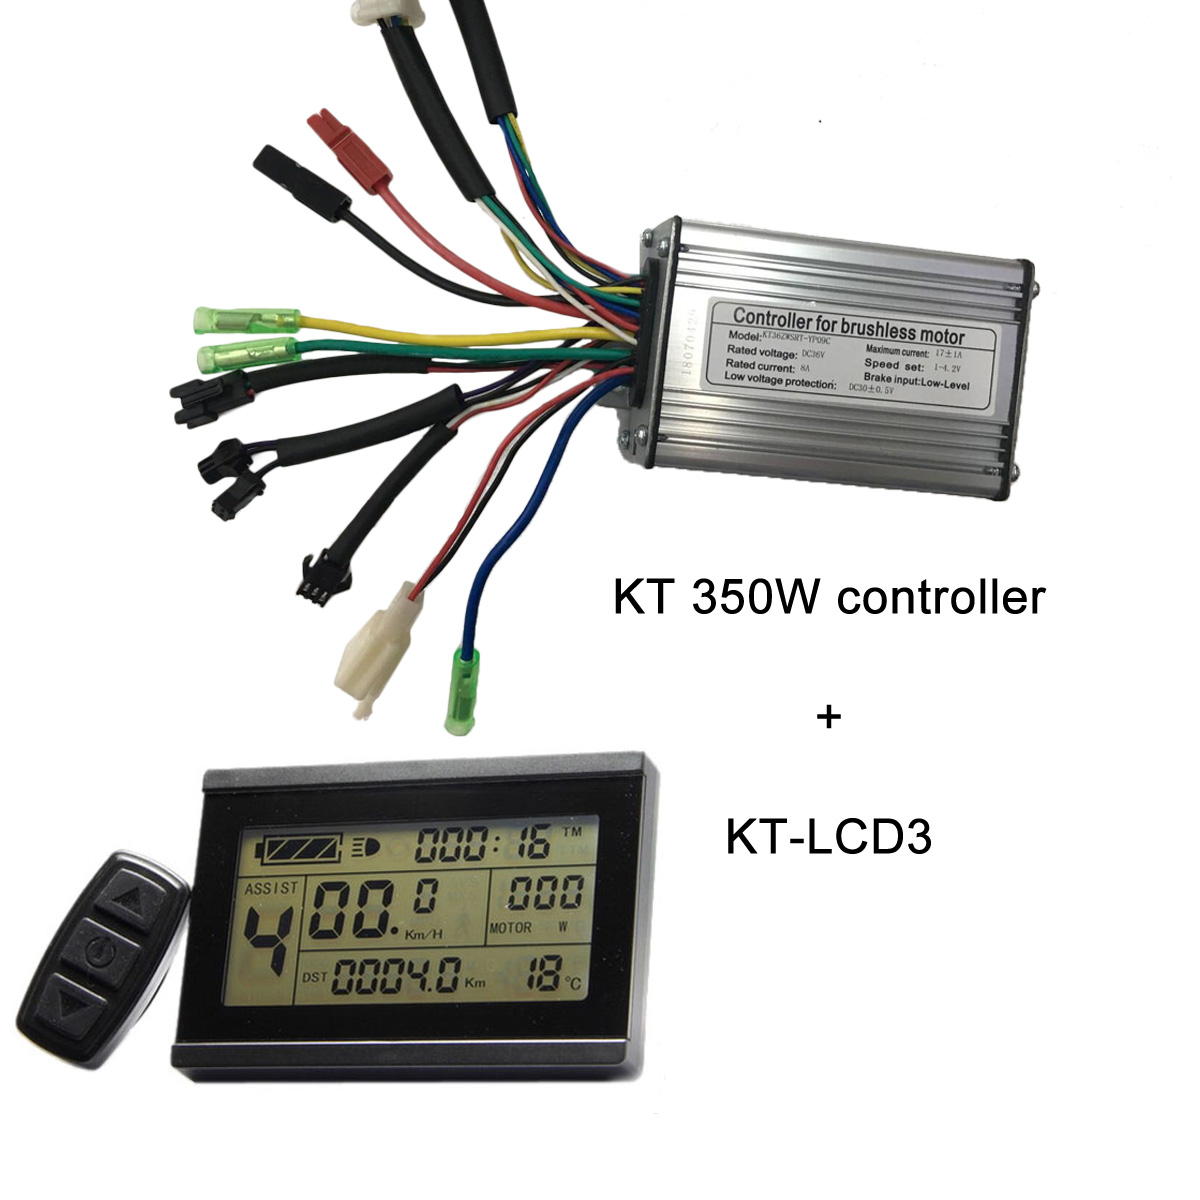 KT 350W controllers wit KT-LCD3 electric bike display